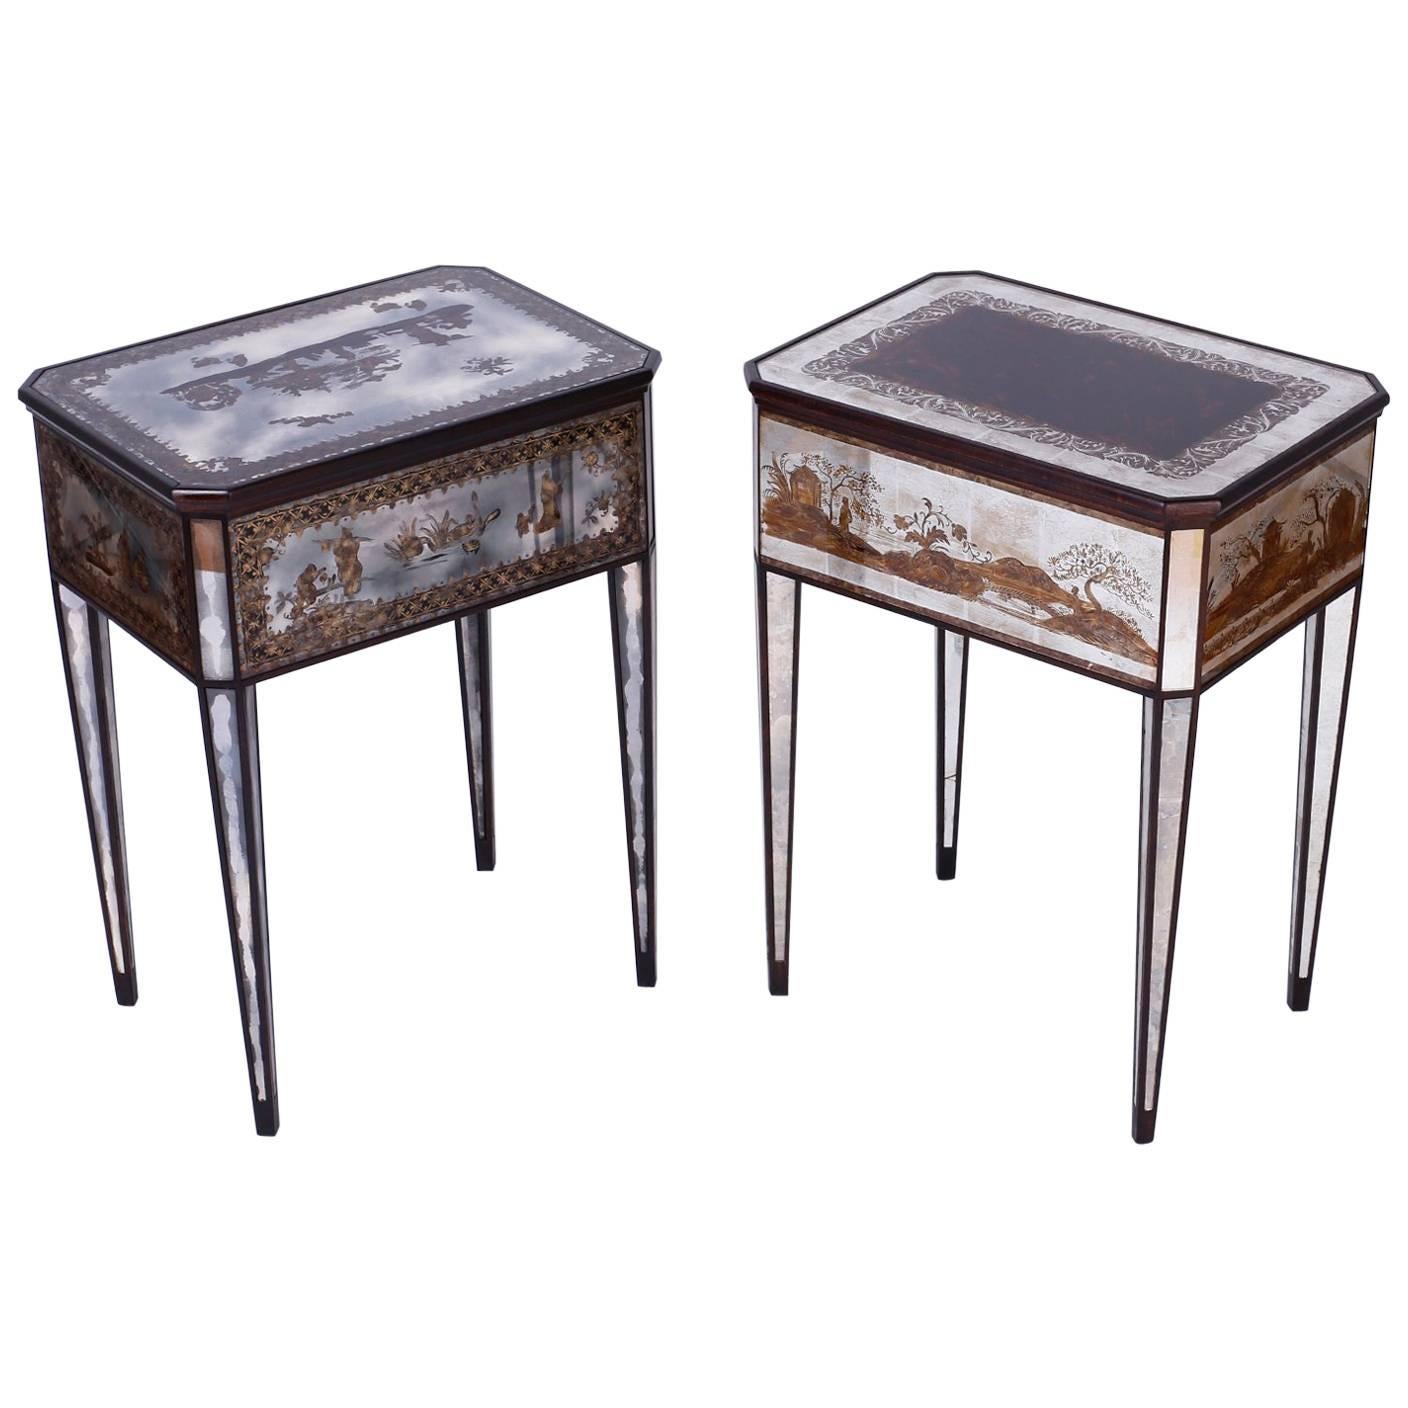 Pair of Italian Mirrored Nightstands or End Tables with a Chinoiserie Motif